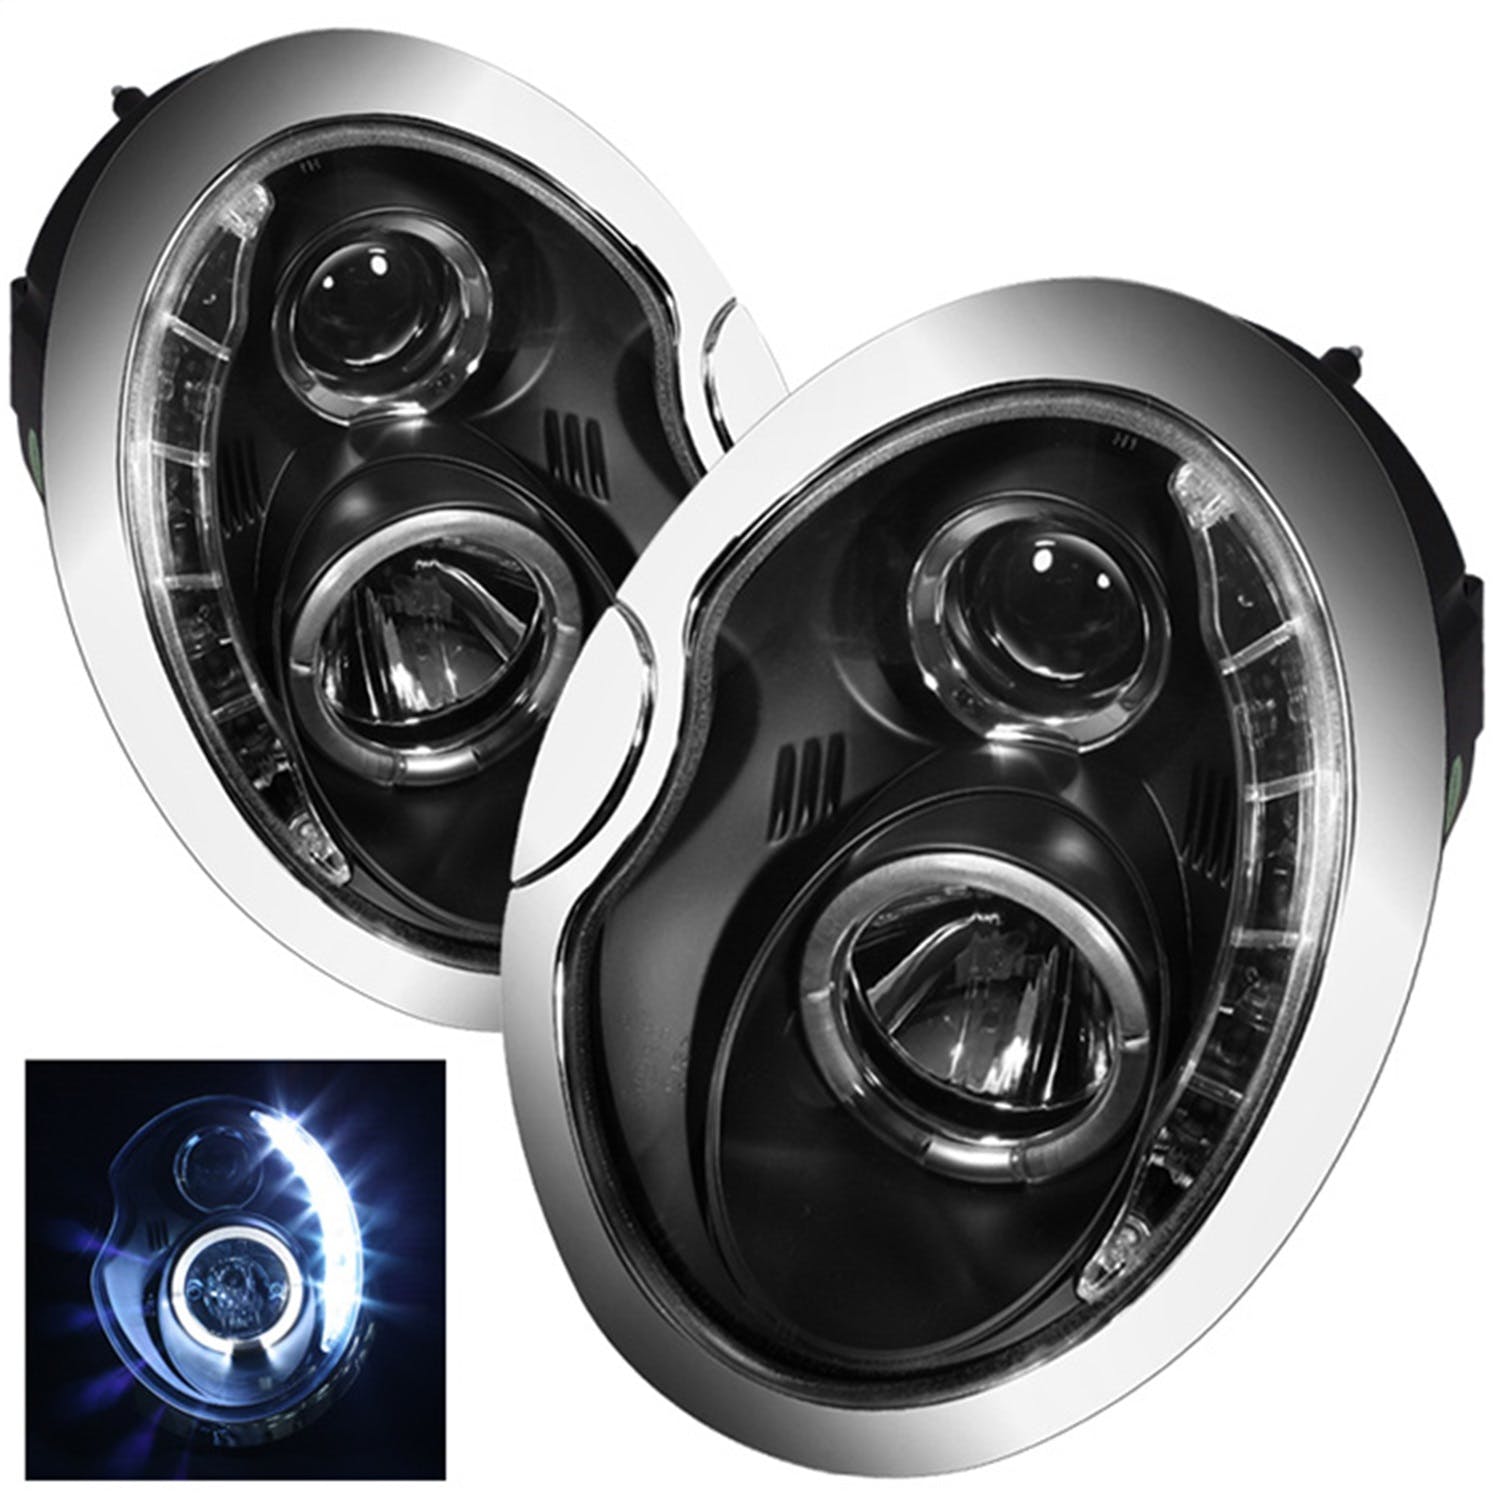 Spyder Auto 5011336 (Spyder) Mini Cooper 02-06 Projector Headlights-DRL-Black-High H1 (Included)-Low